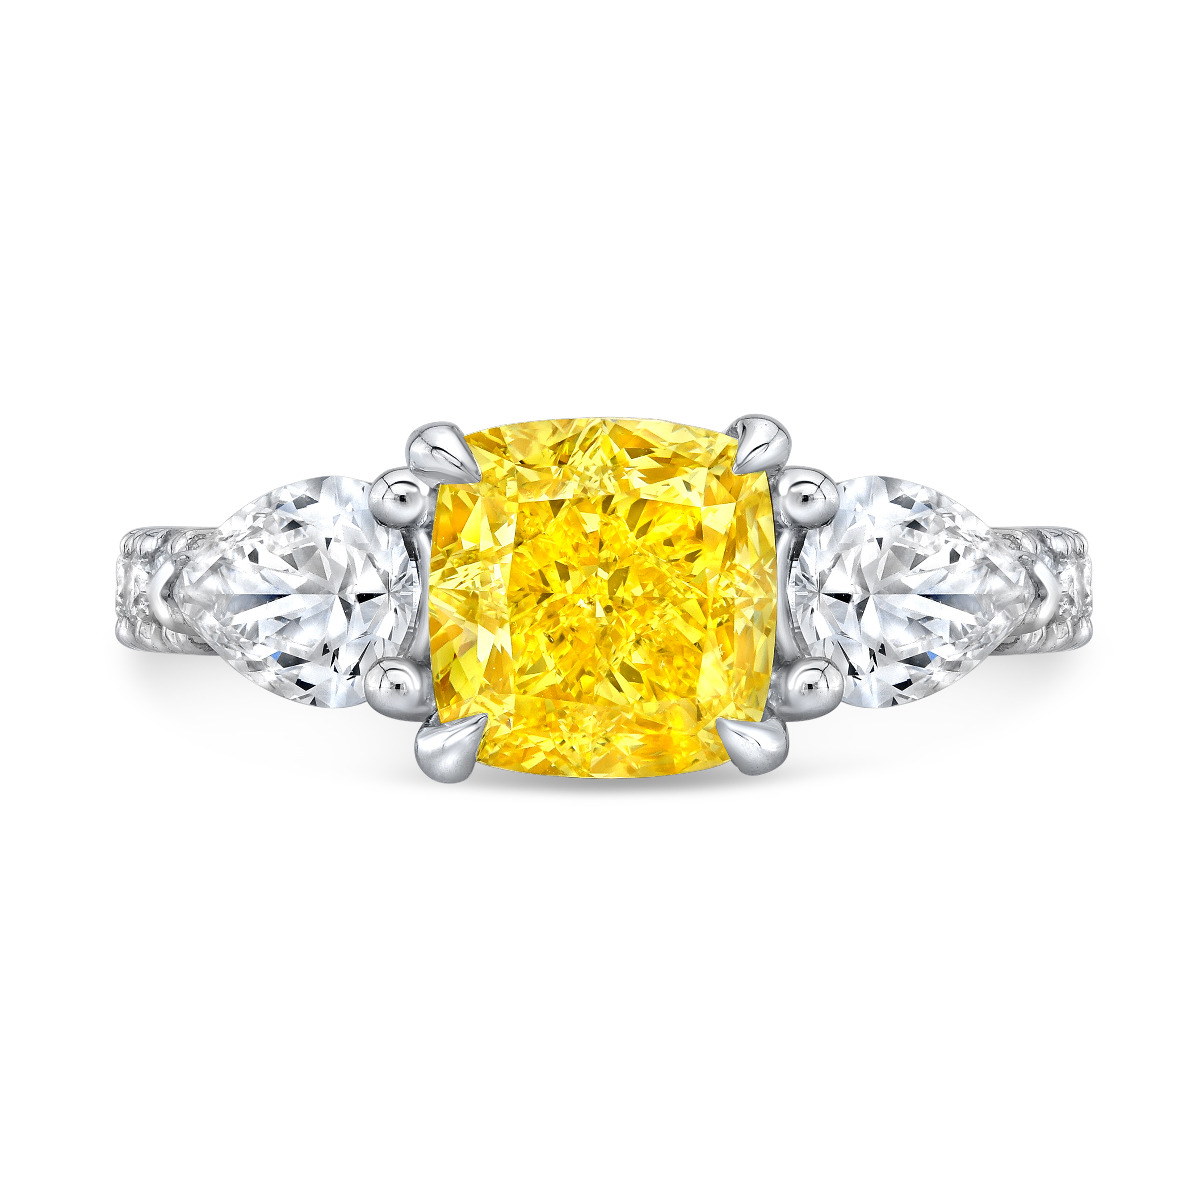 This Exquisite 3 Stone Pave ring is also available in Solid White, Rose Gold, Yellow Gold (14K & 18K) and Platinum.